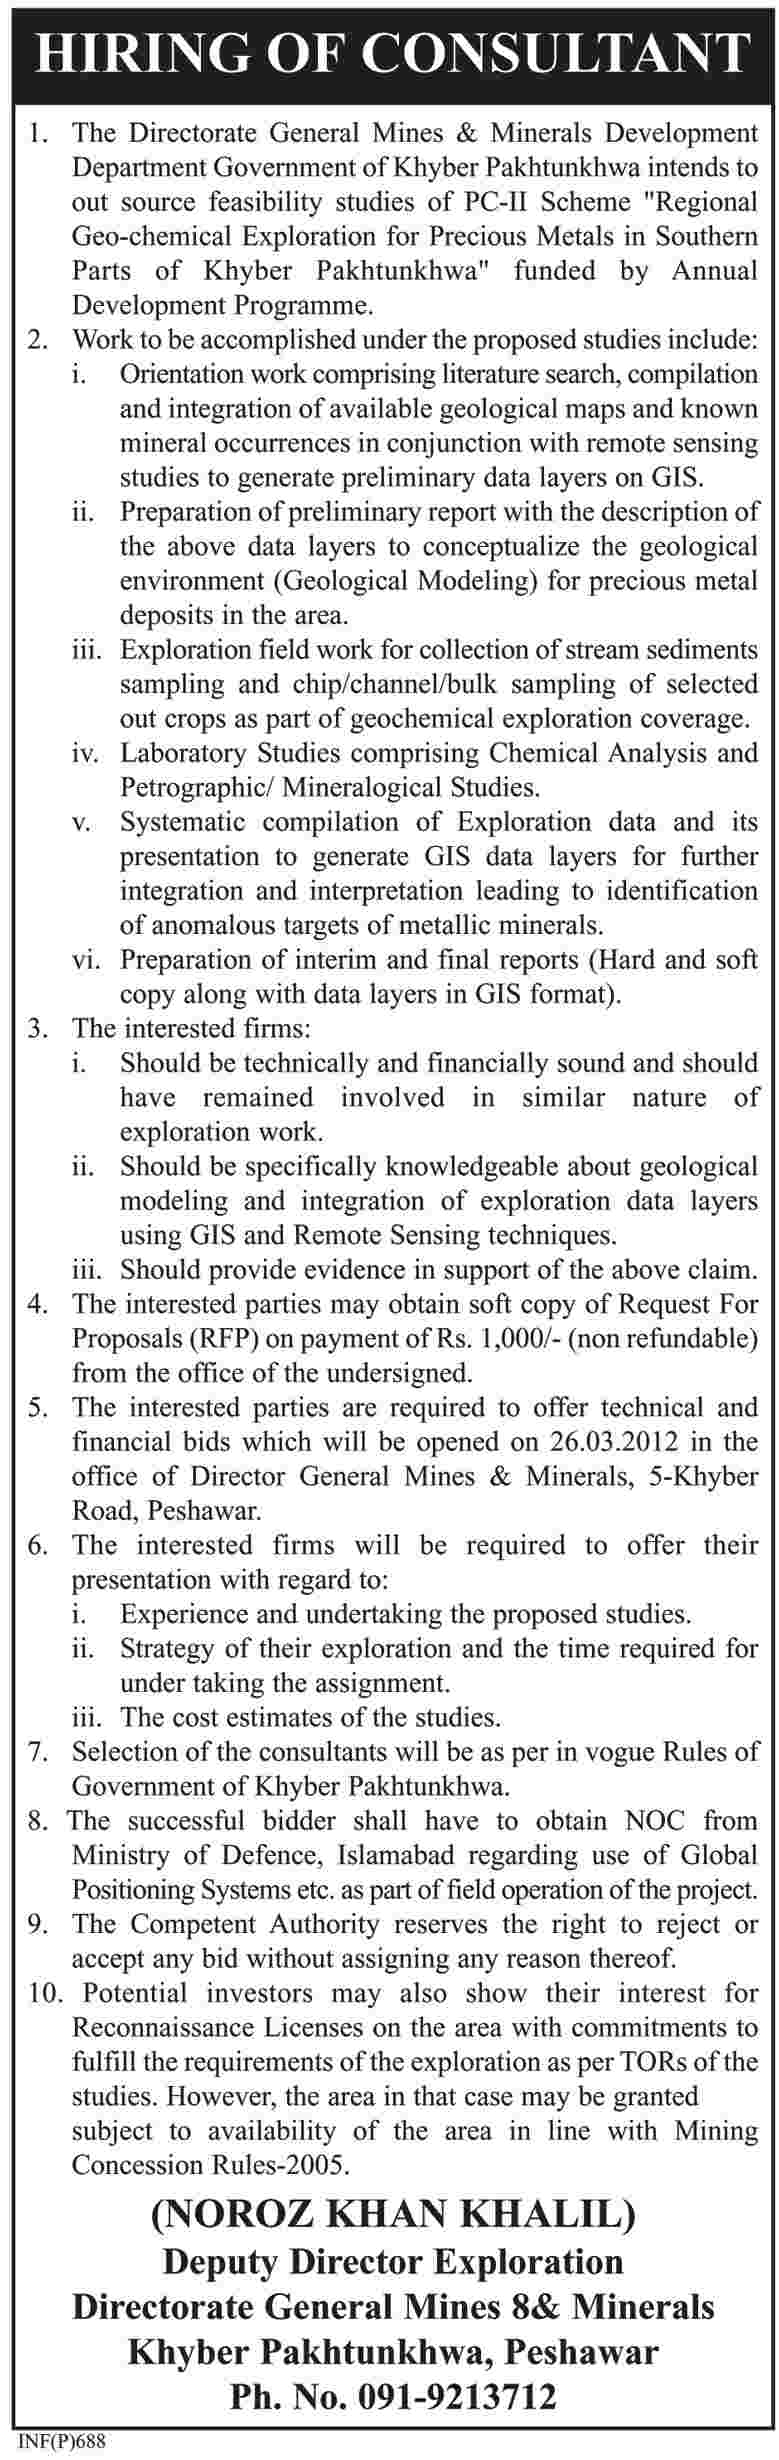 Consultant Jobs in The Directorate General Mines & Minerals Development Department Government of KPK